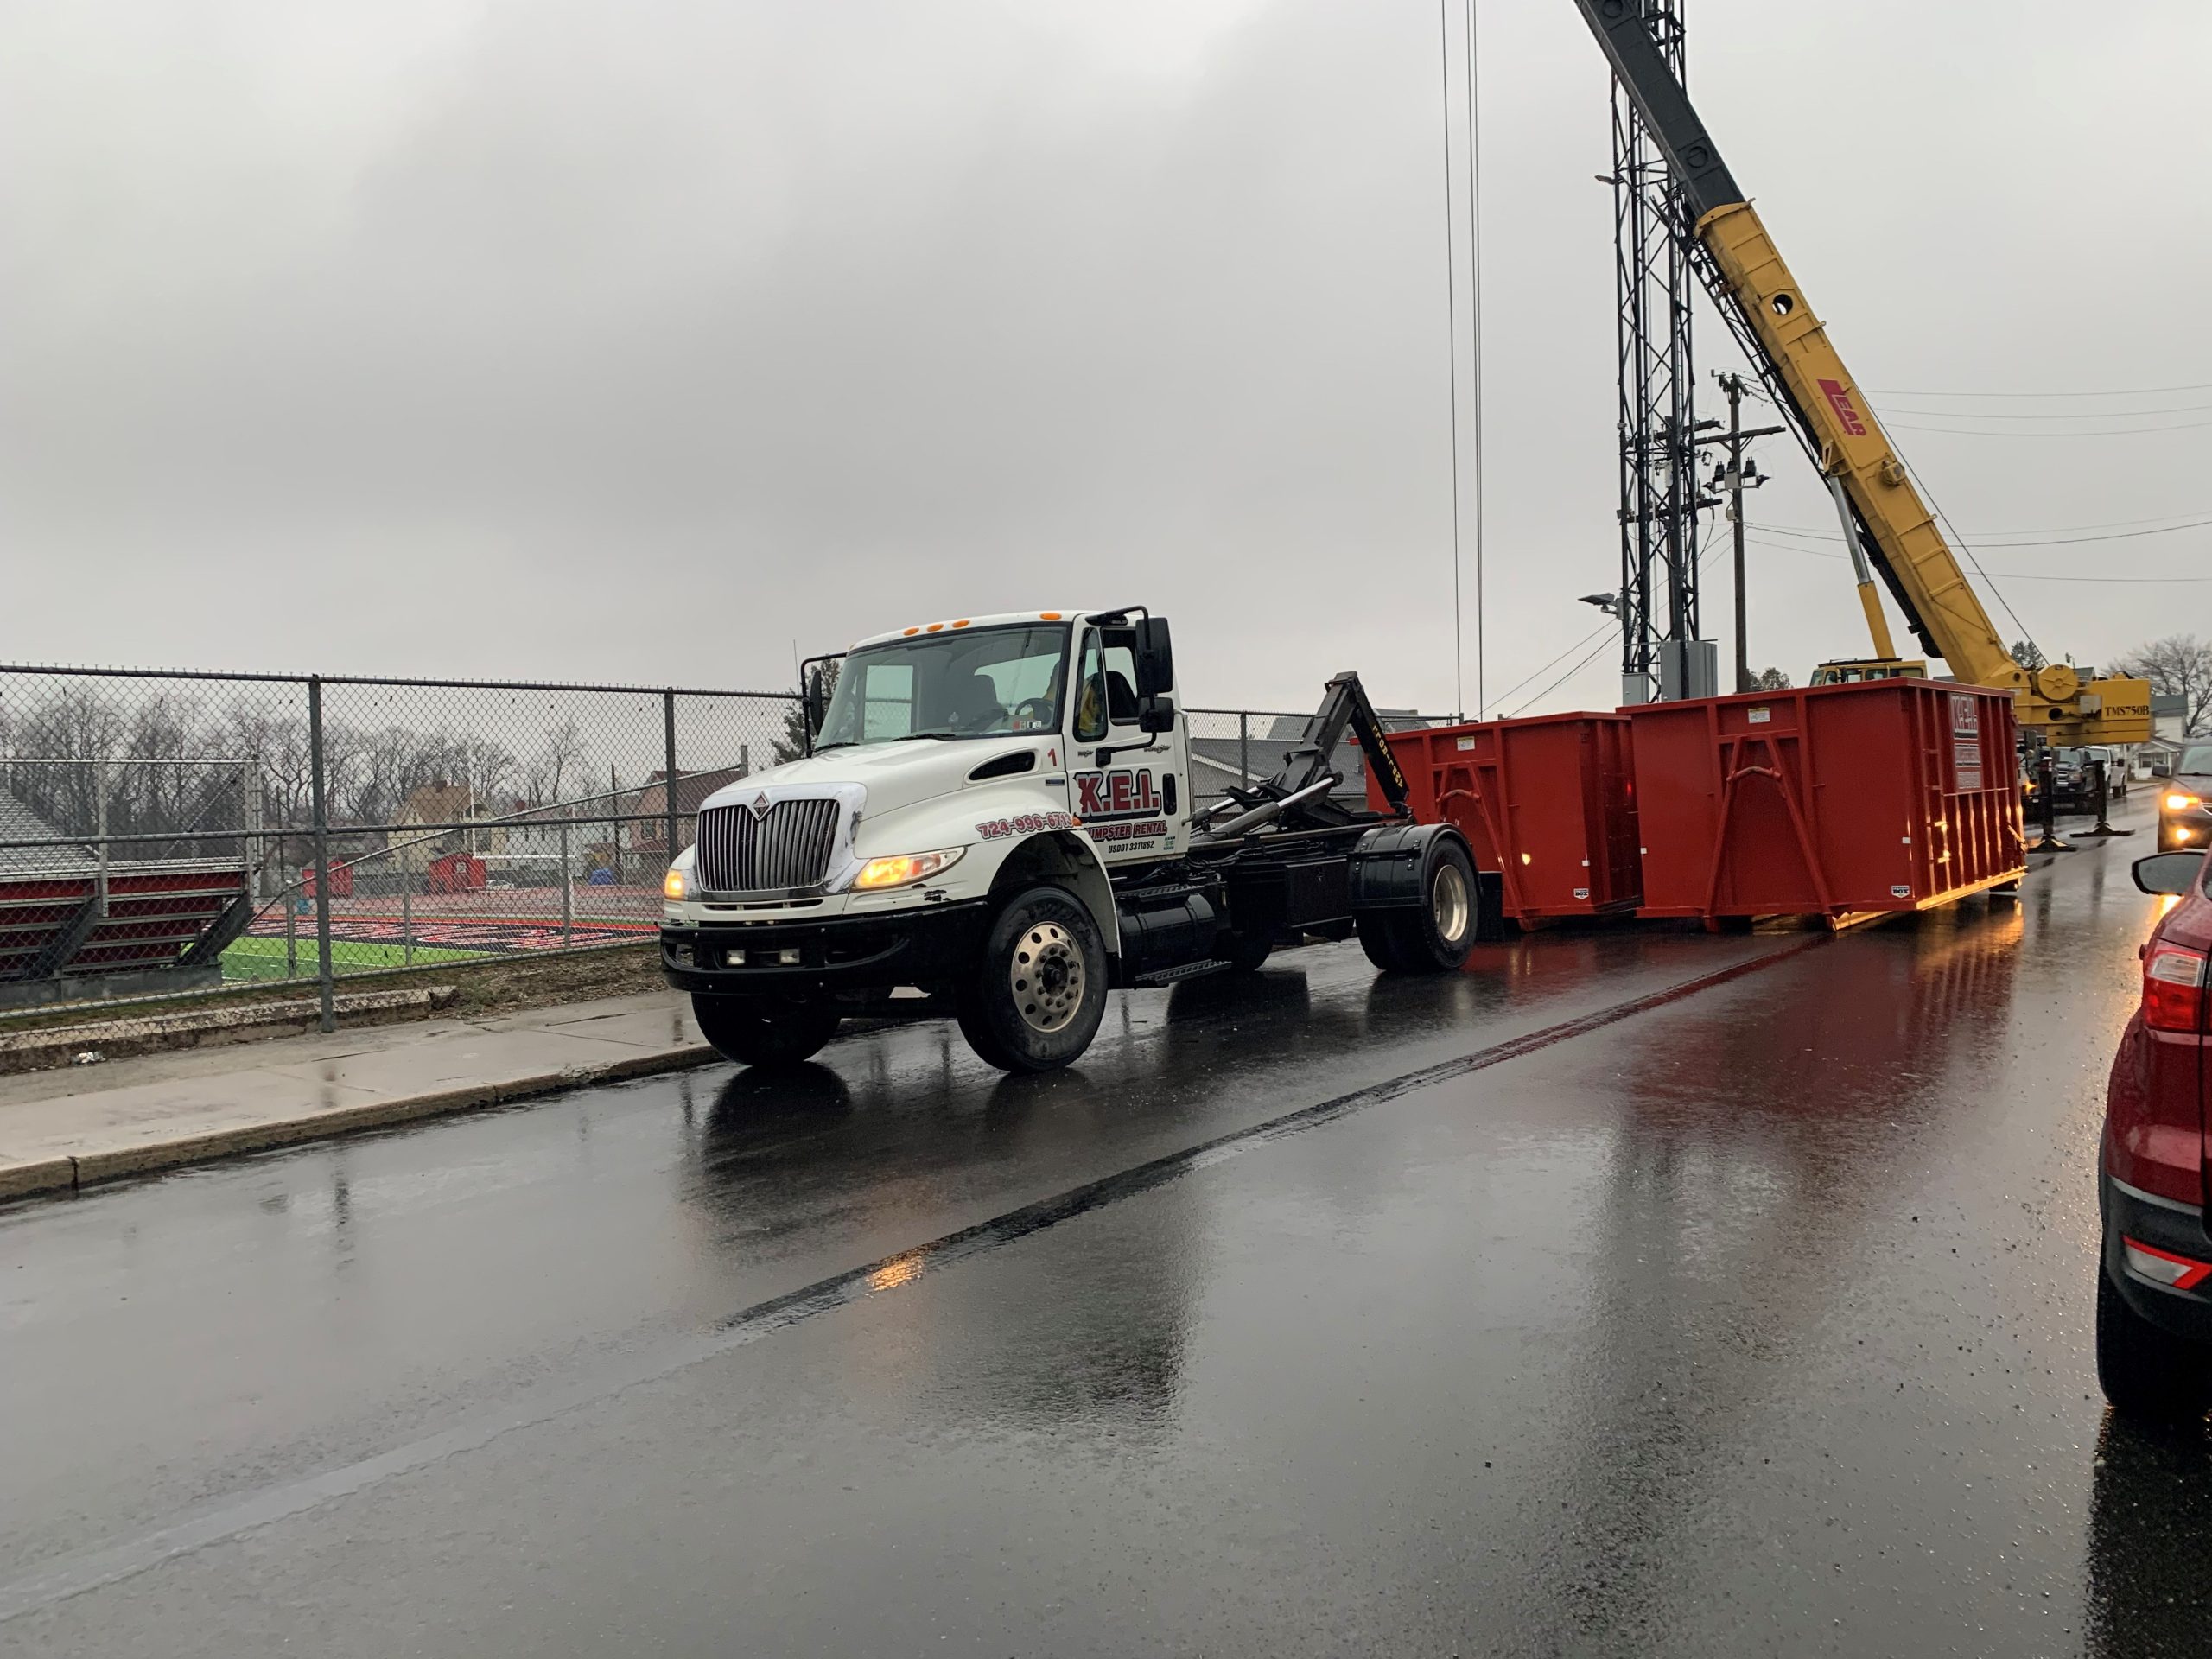 A KEI Dumpster Rental truck delivers two construction dumpsters to a project site.